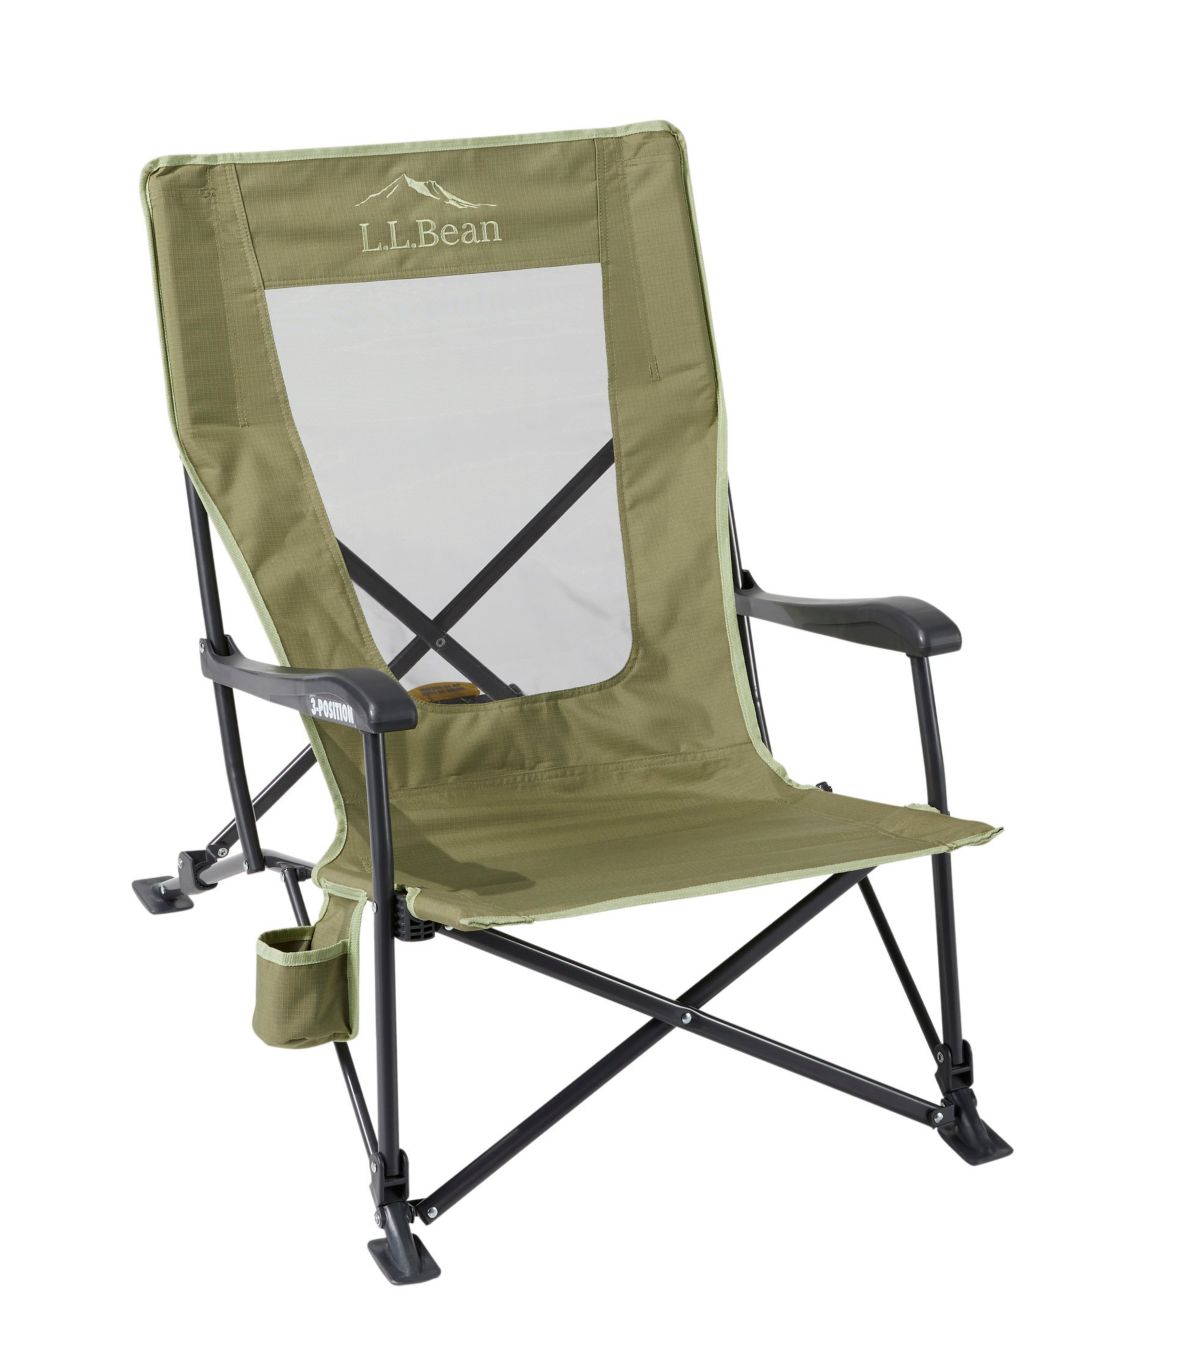 L.L.Bean Easy Comfort Camp Chair, Low